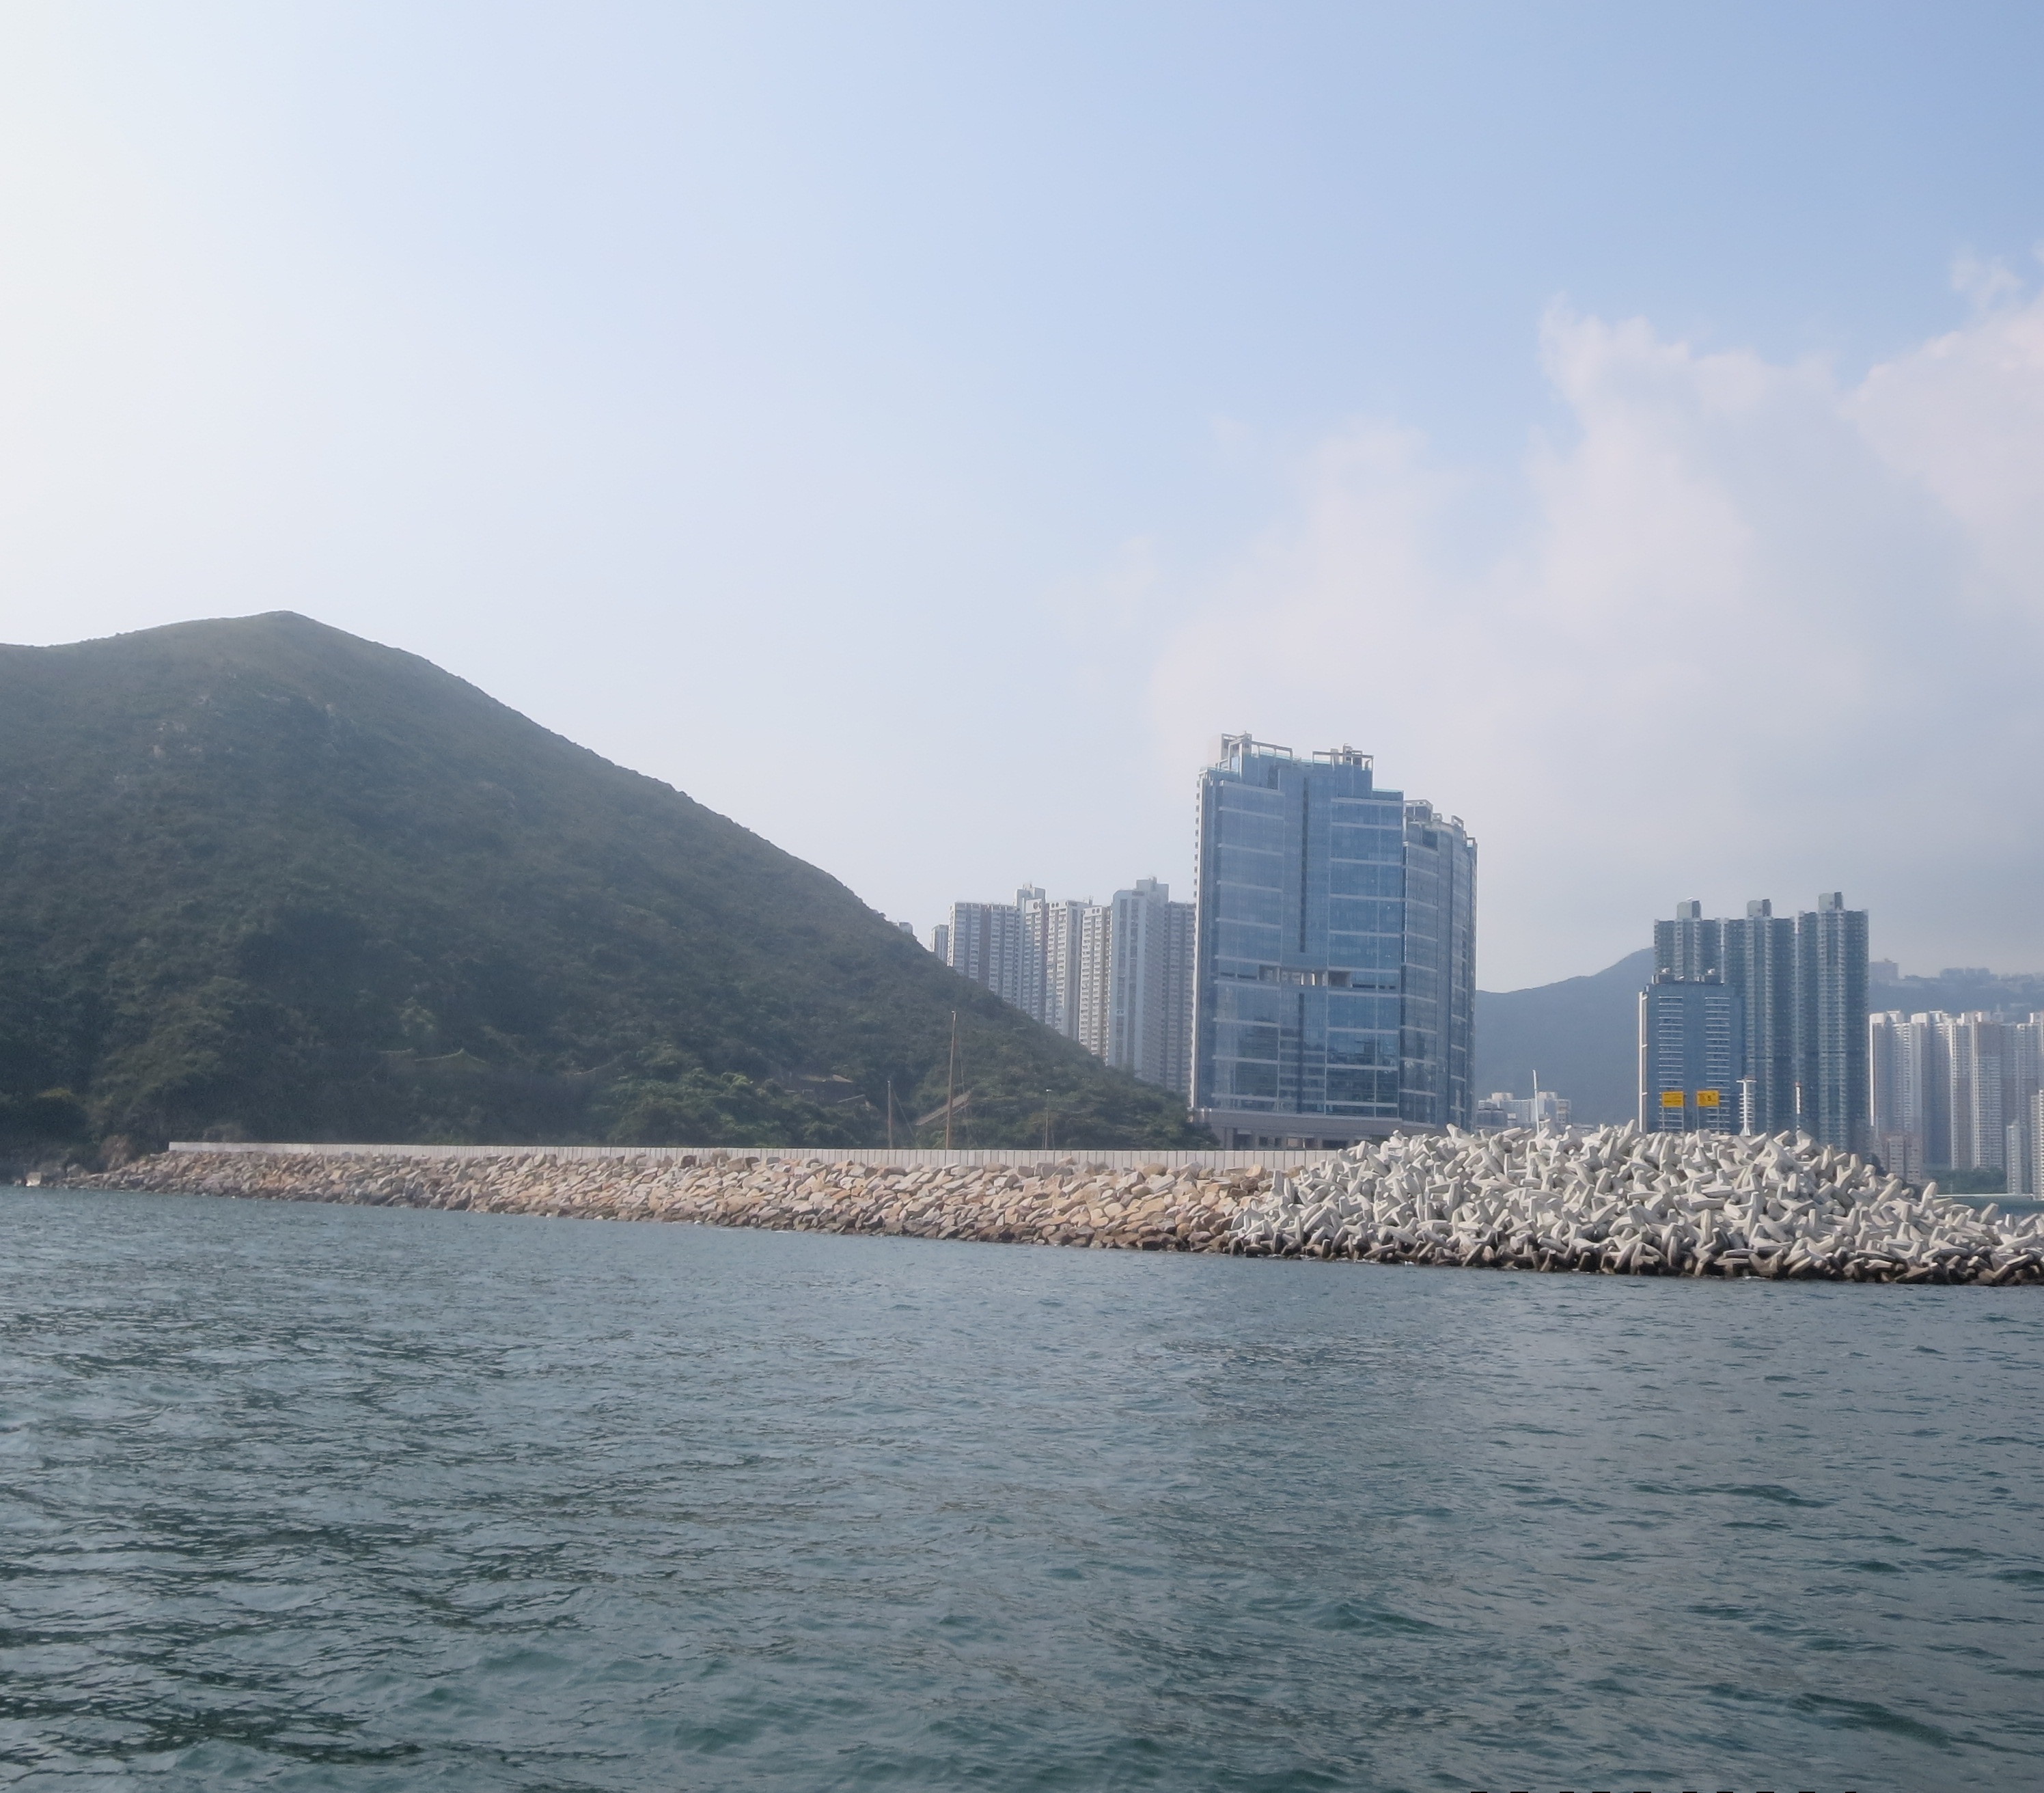 Enhancement works at the breakwater at the Aberdeen South Typhoon Shelter